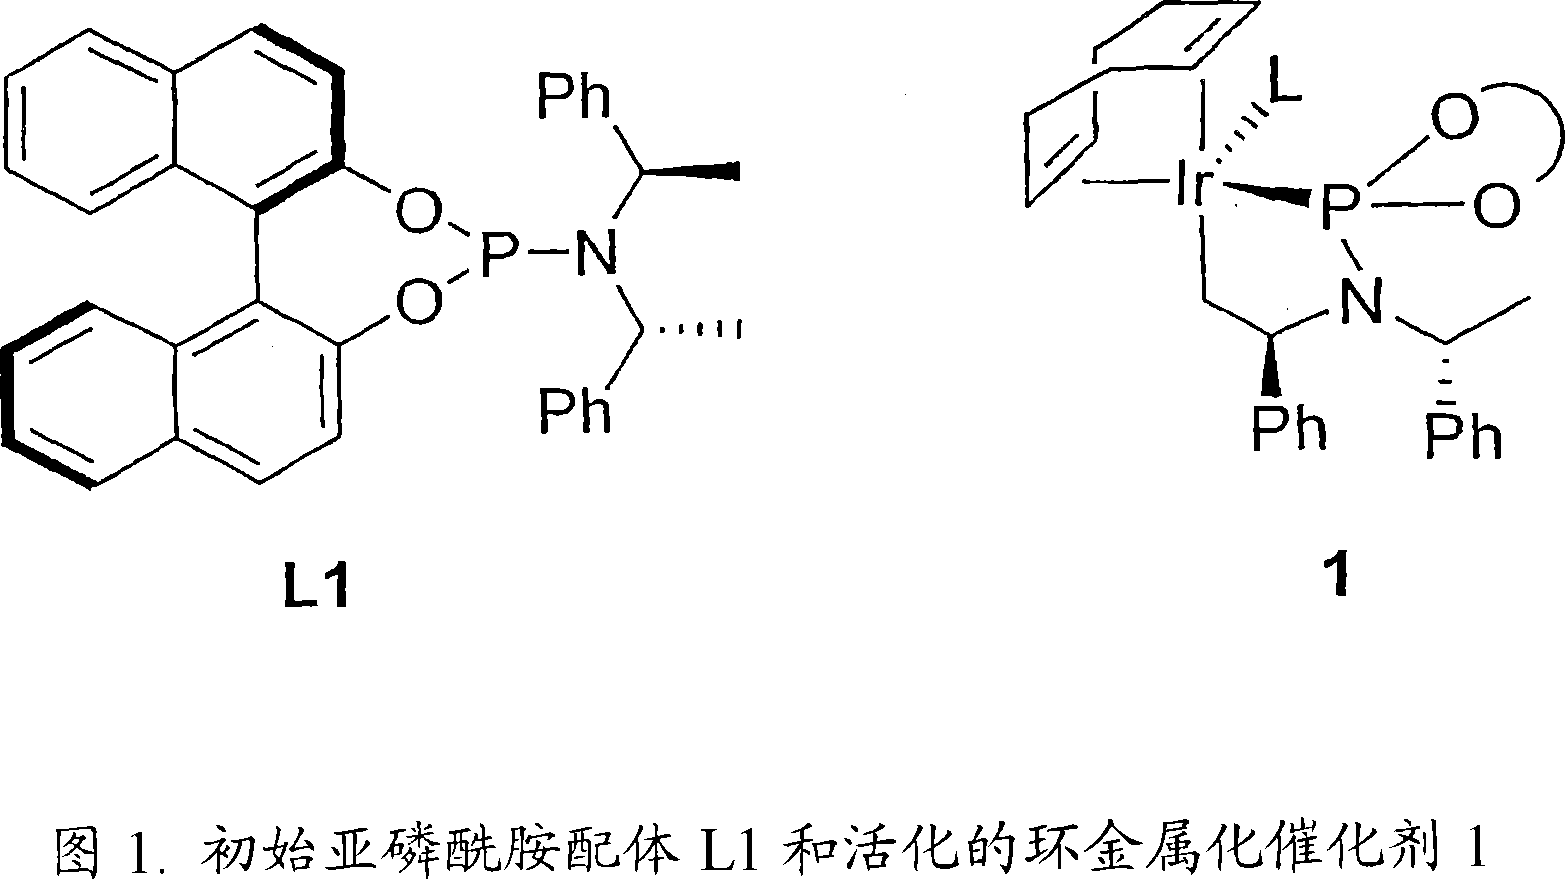 Enantioselective phosphoramidite compounds and catalysts